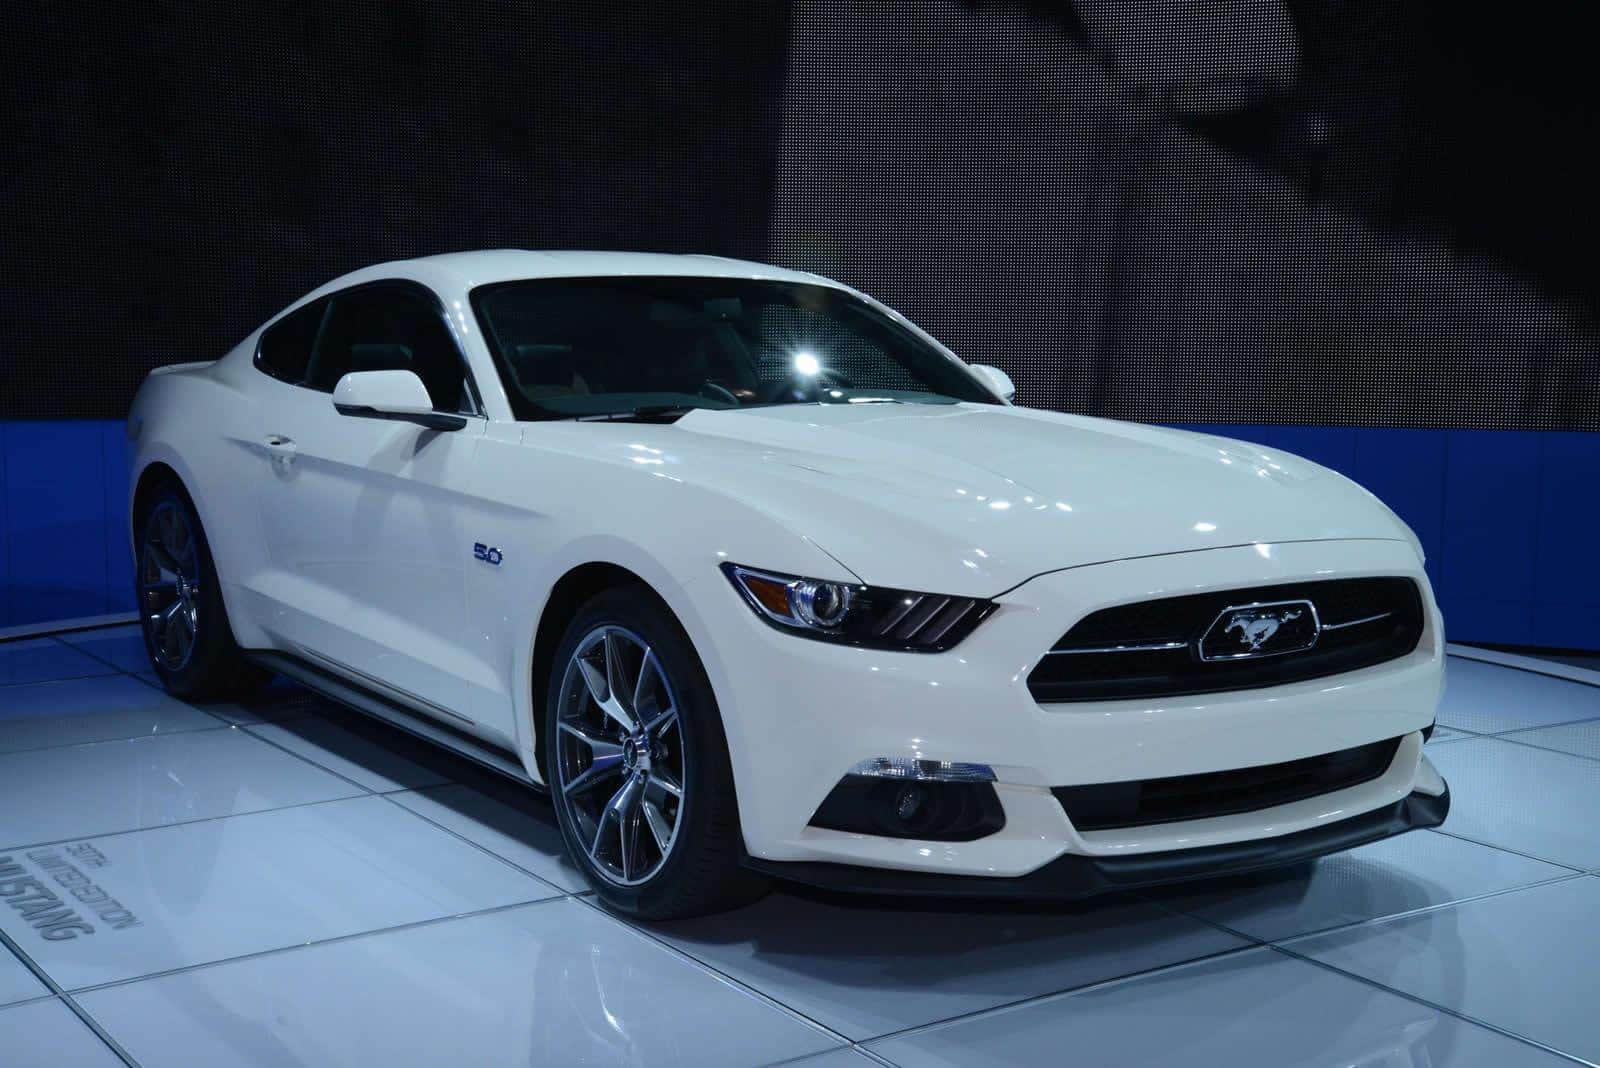 Ford-Mustang-50th-Anniversary-Limited-Edition 7